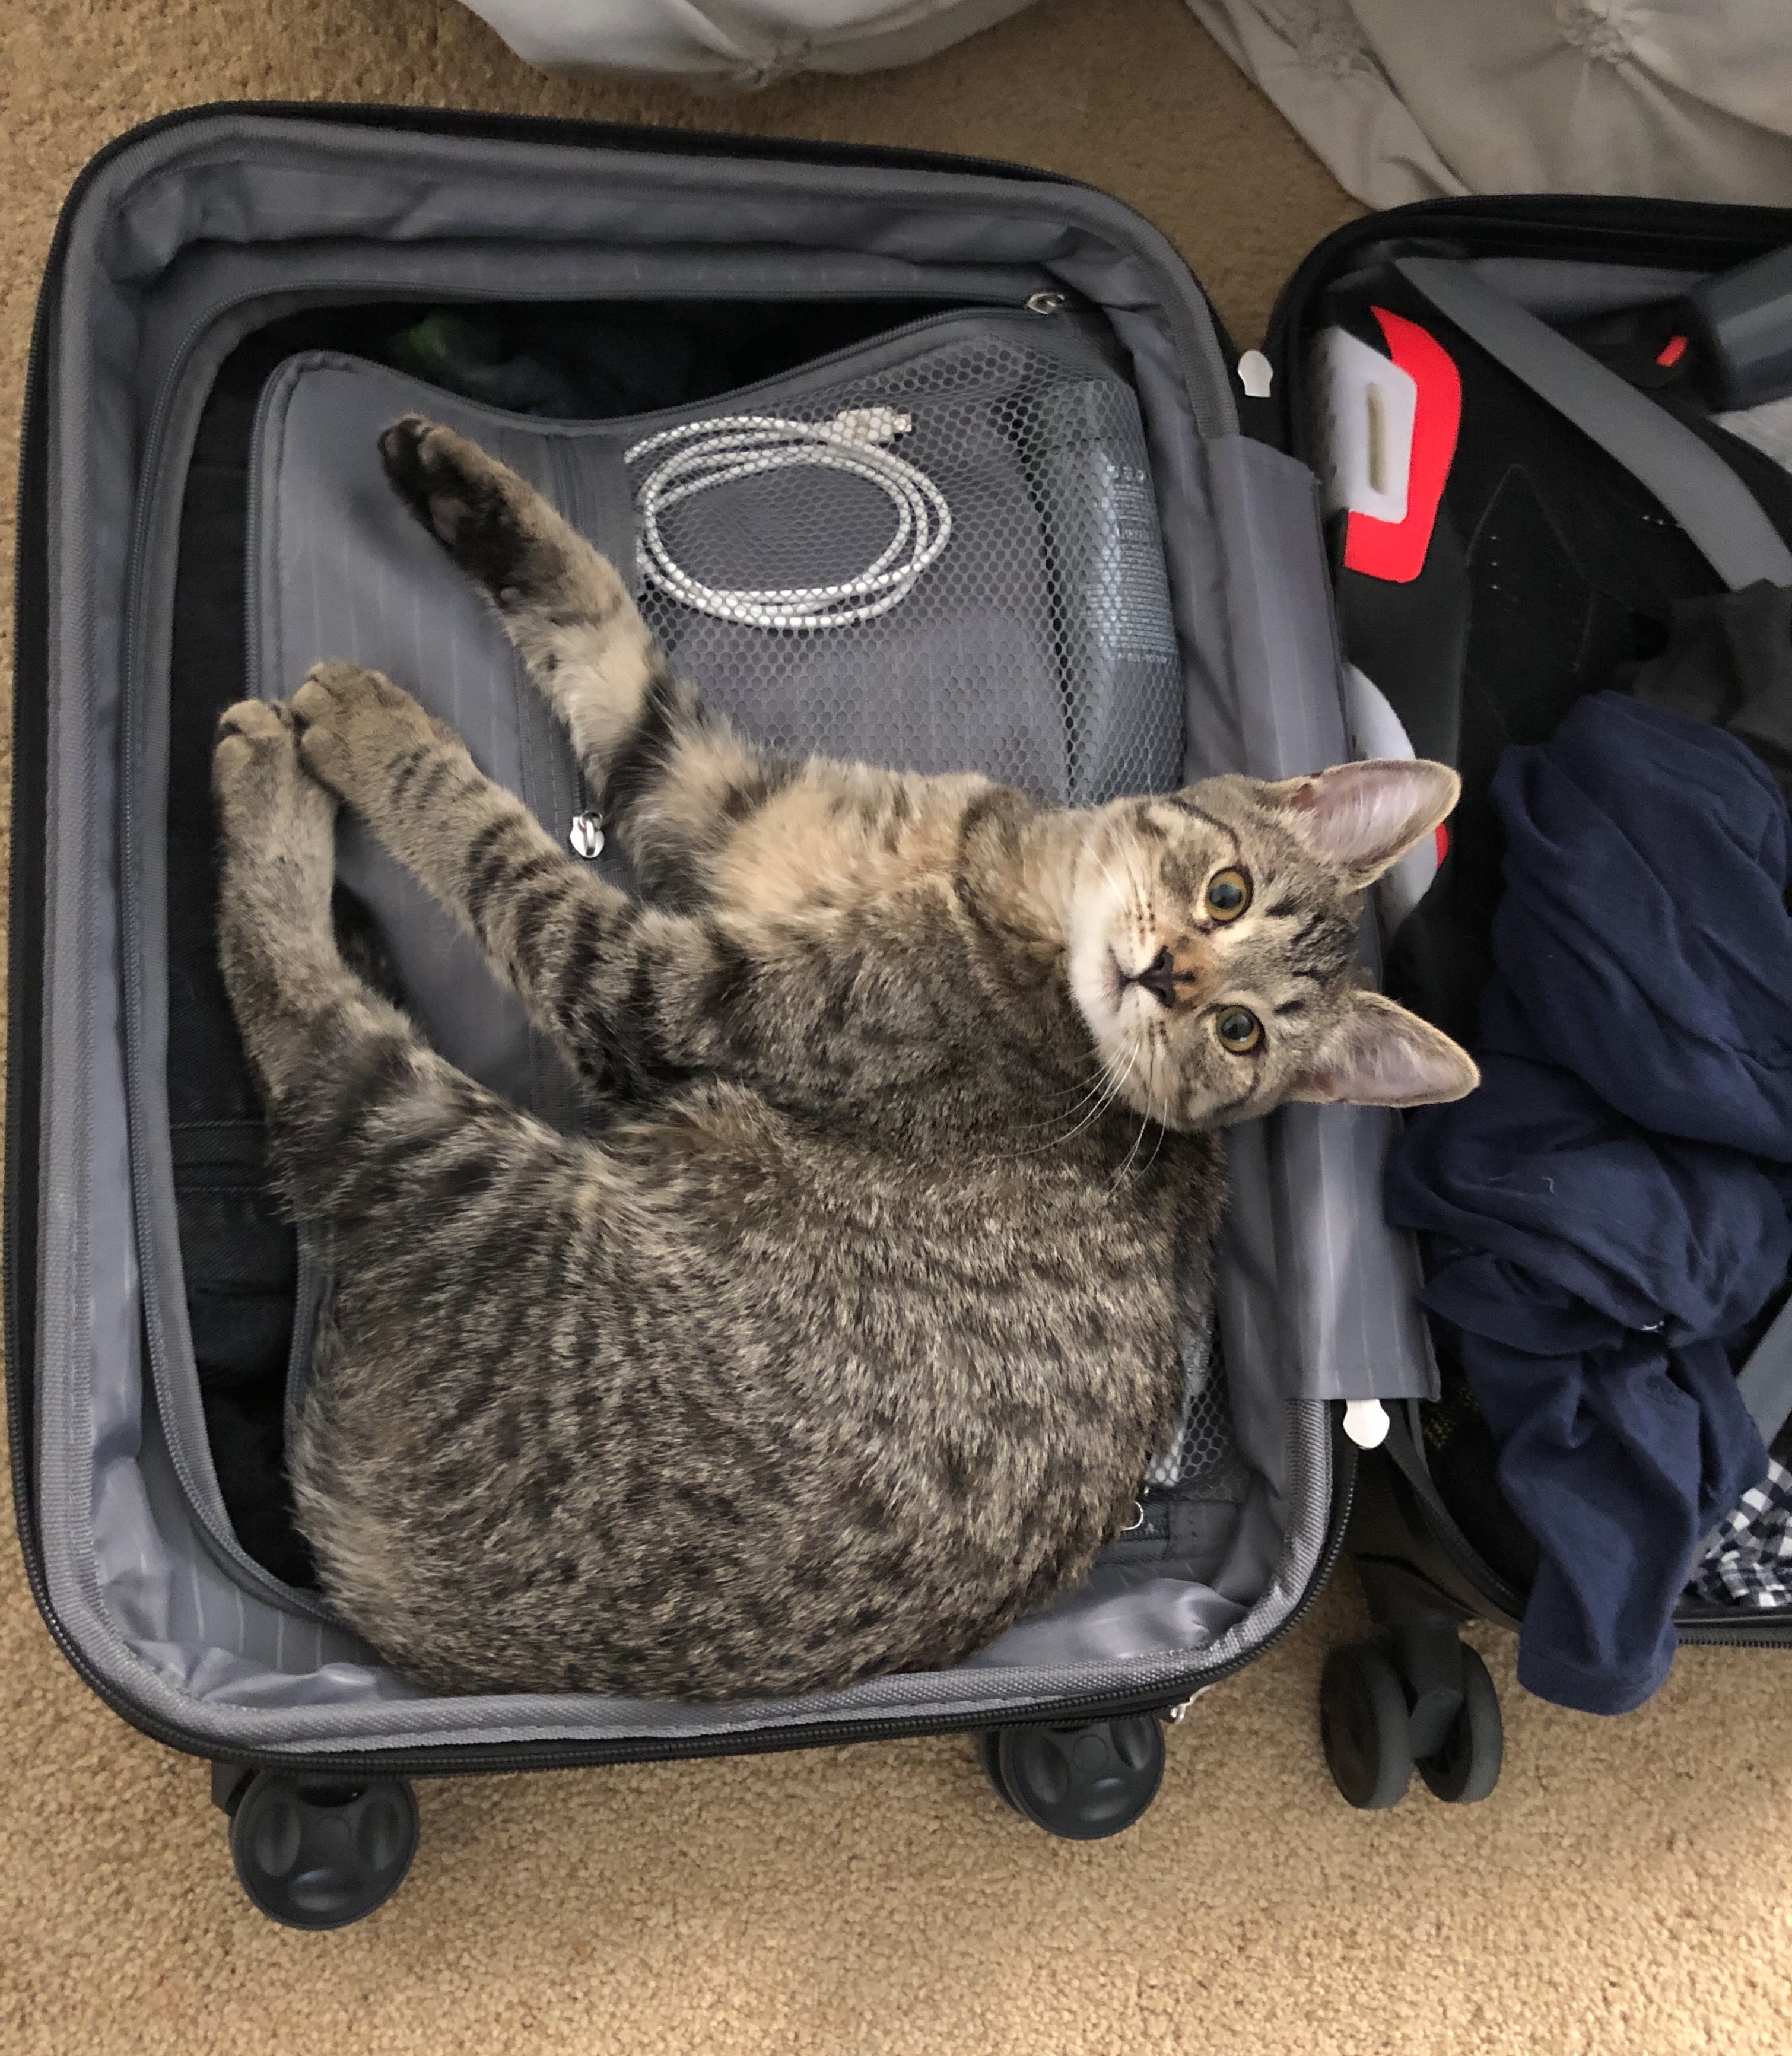 Photo of a cat in a suitcase